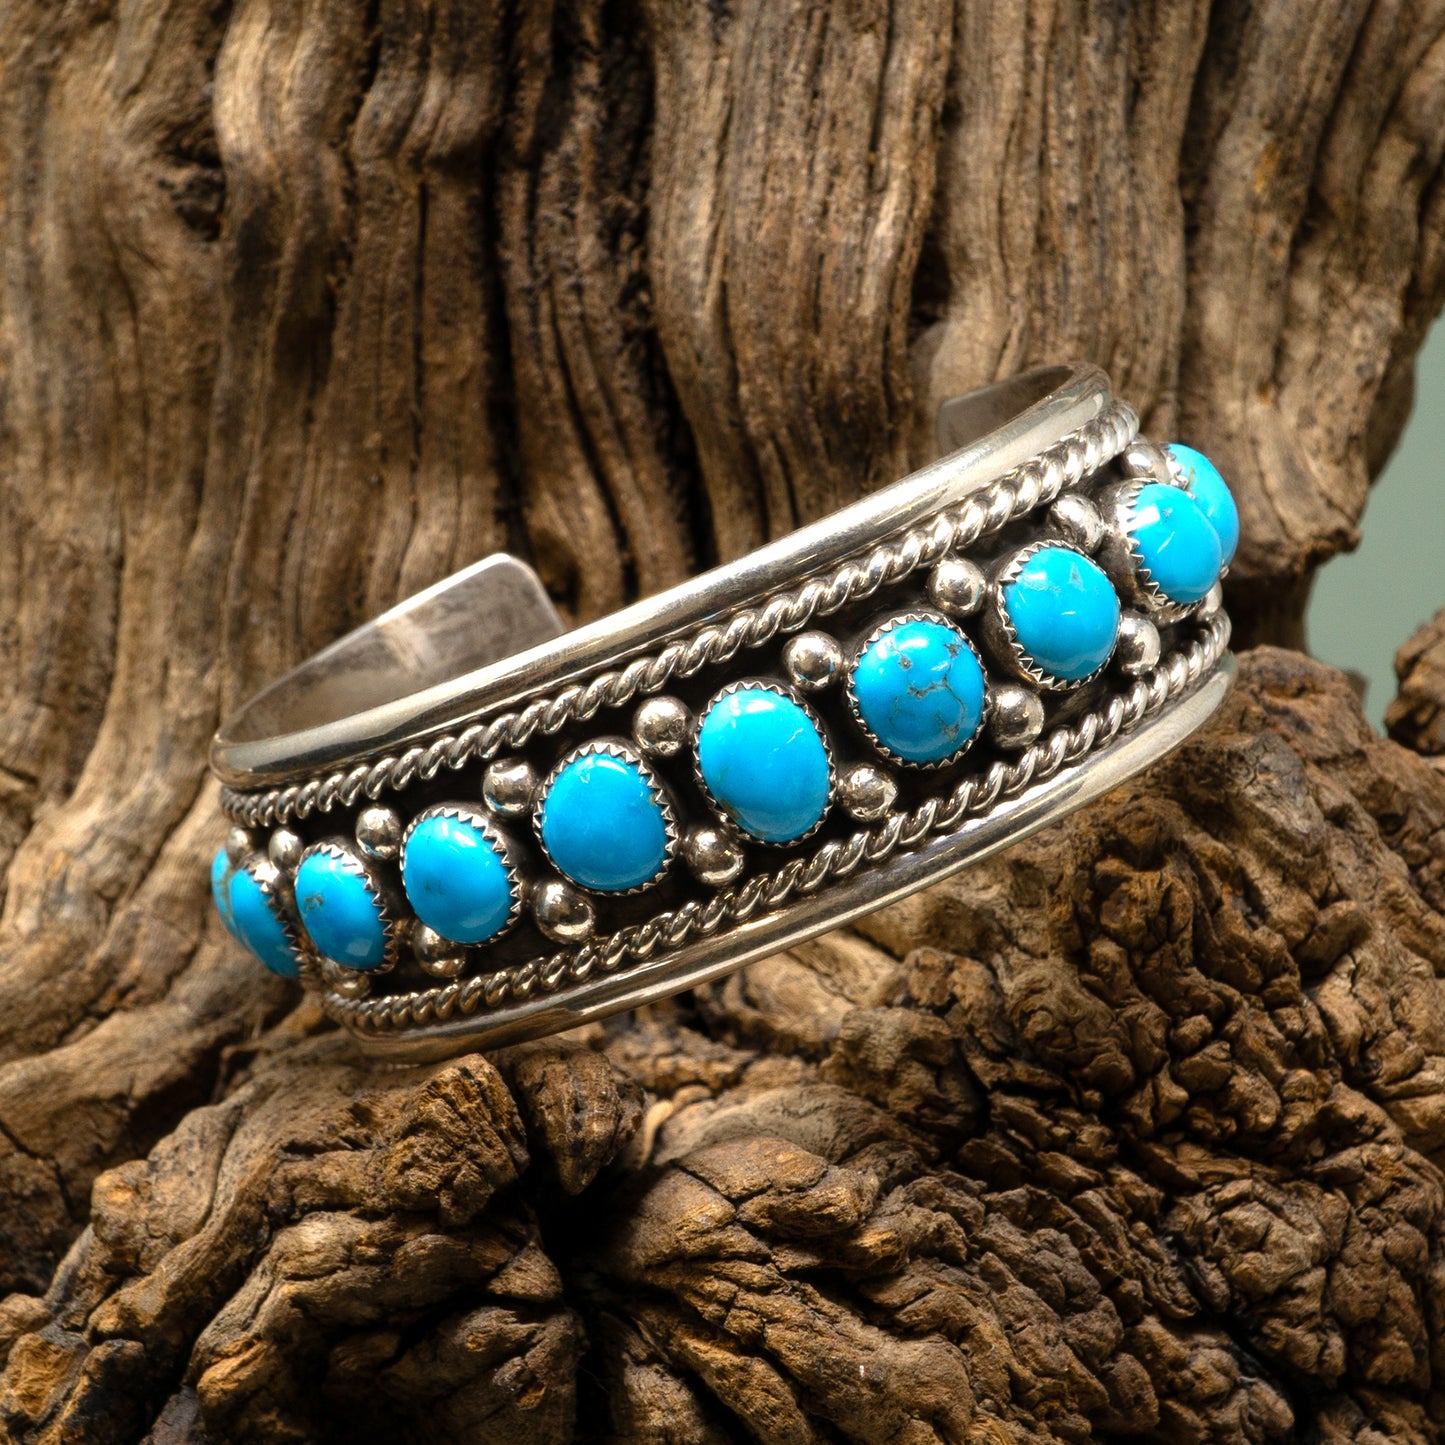 Turquoise & Silver Cuff Bracelet by Chris Charley